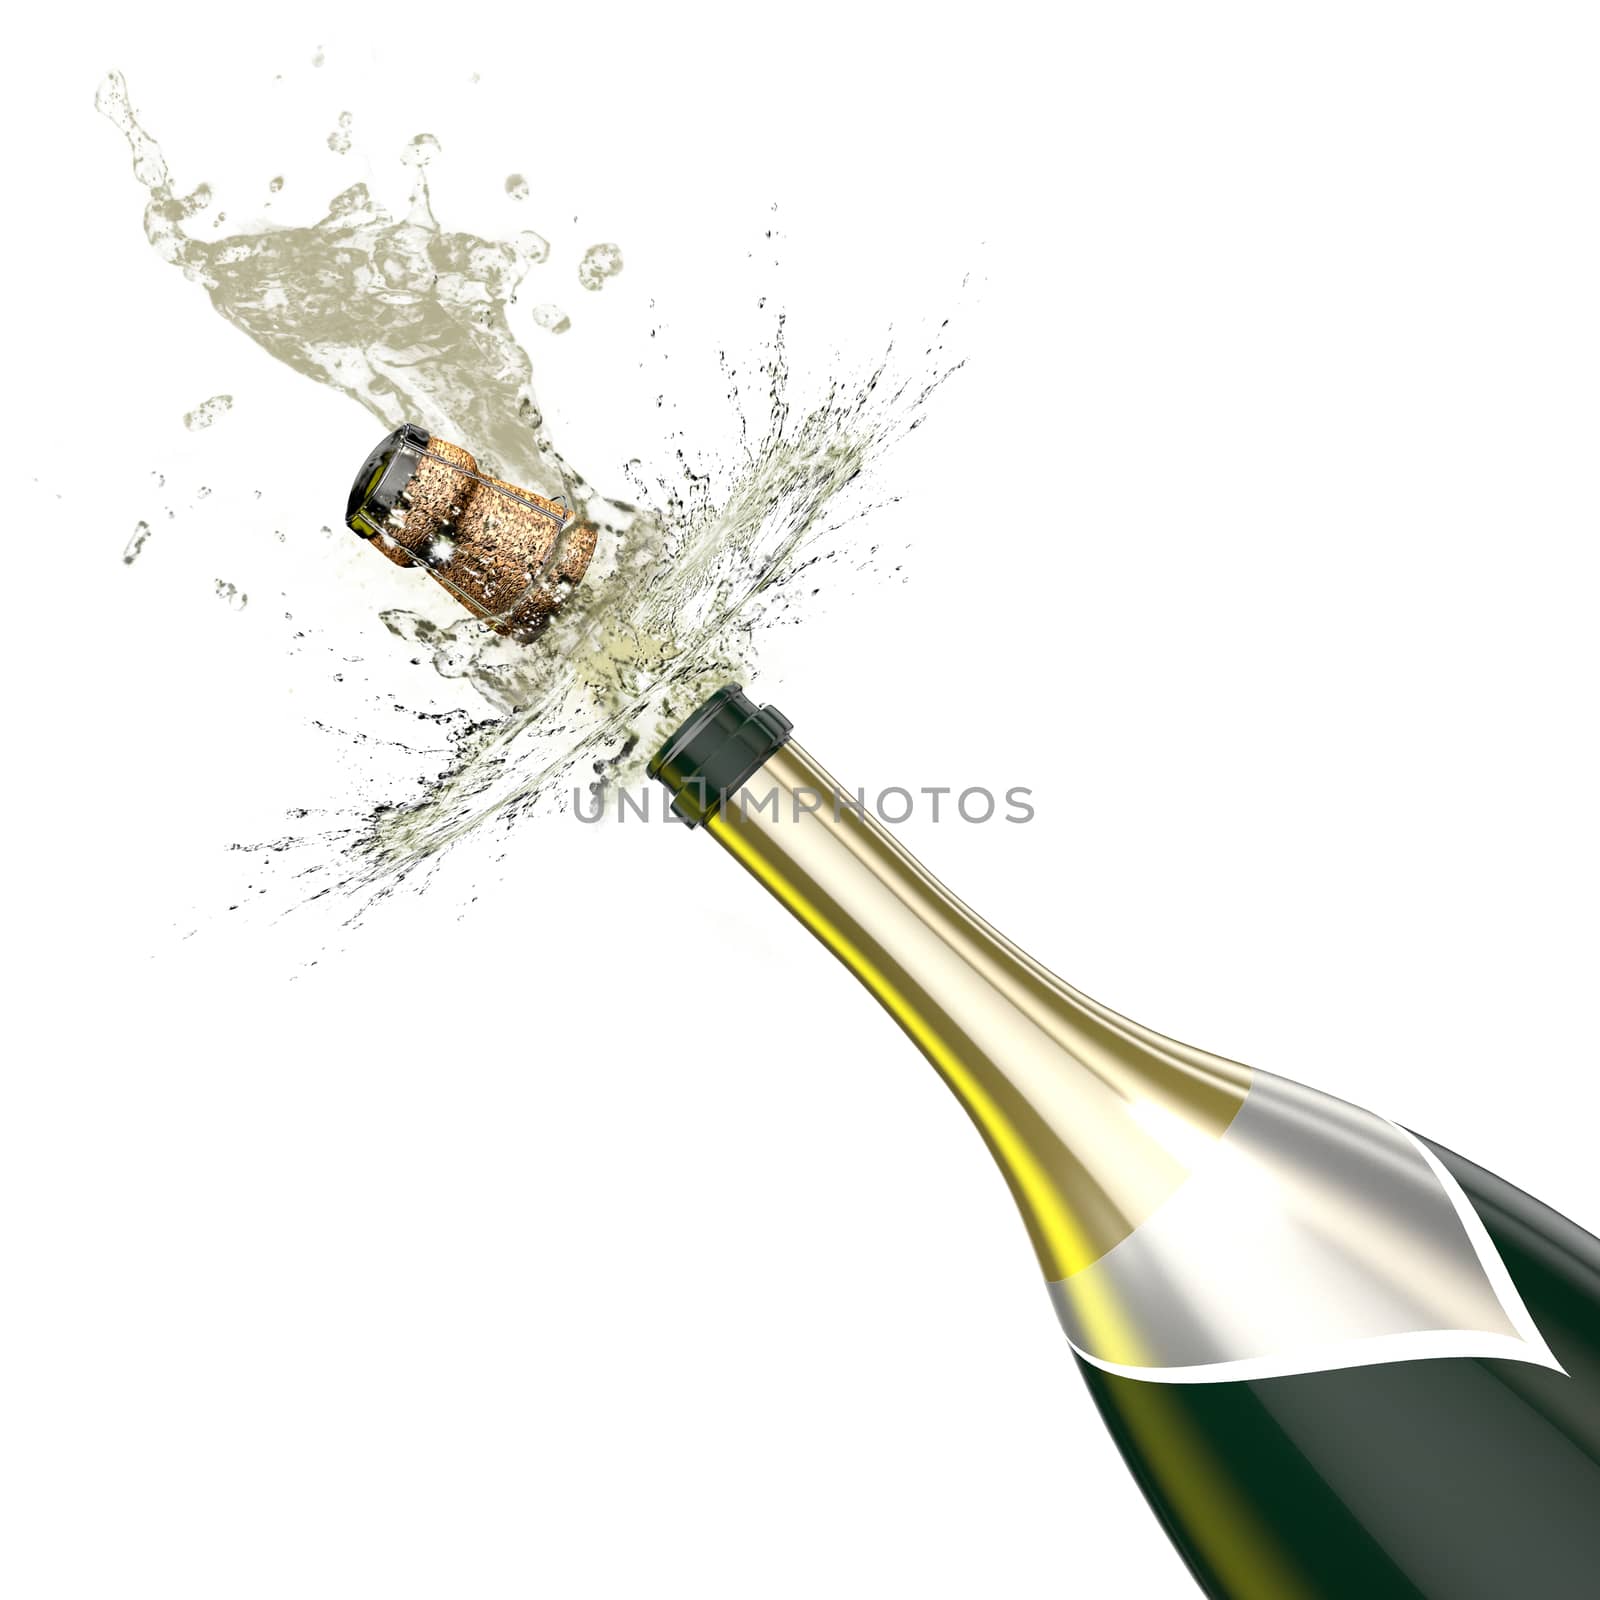 Opened bottle of champagne foaming with flying cork close-up. This illustration represents the celebration.